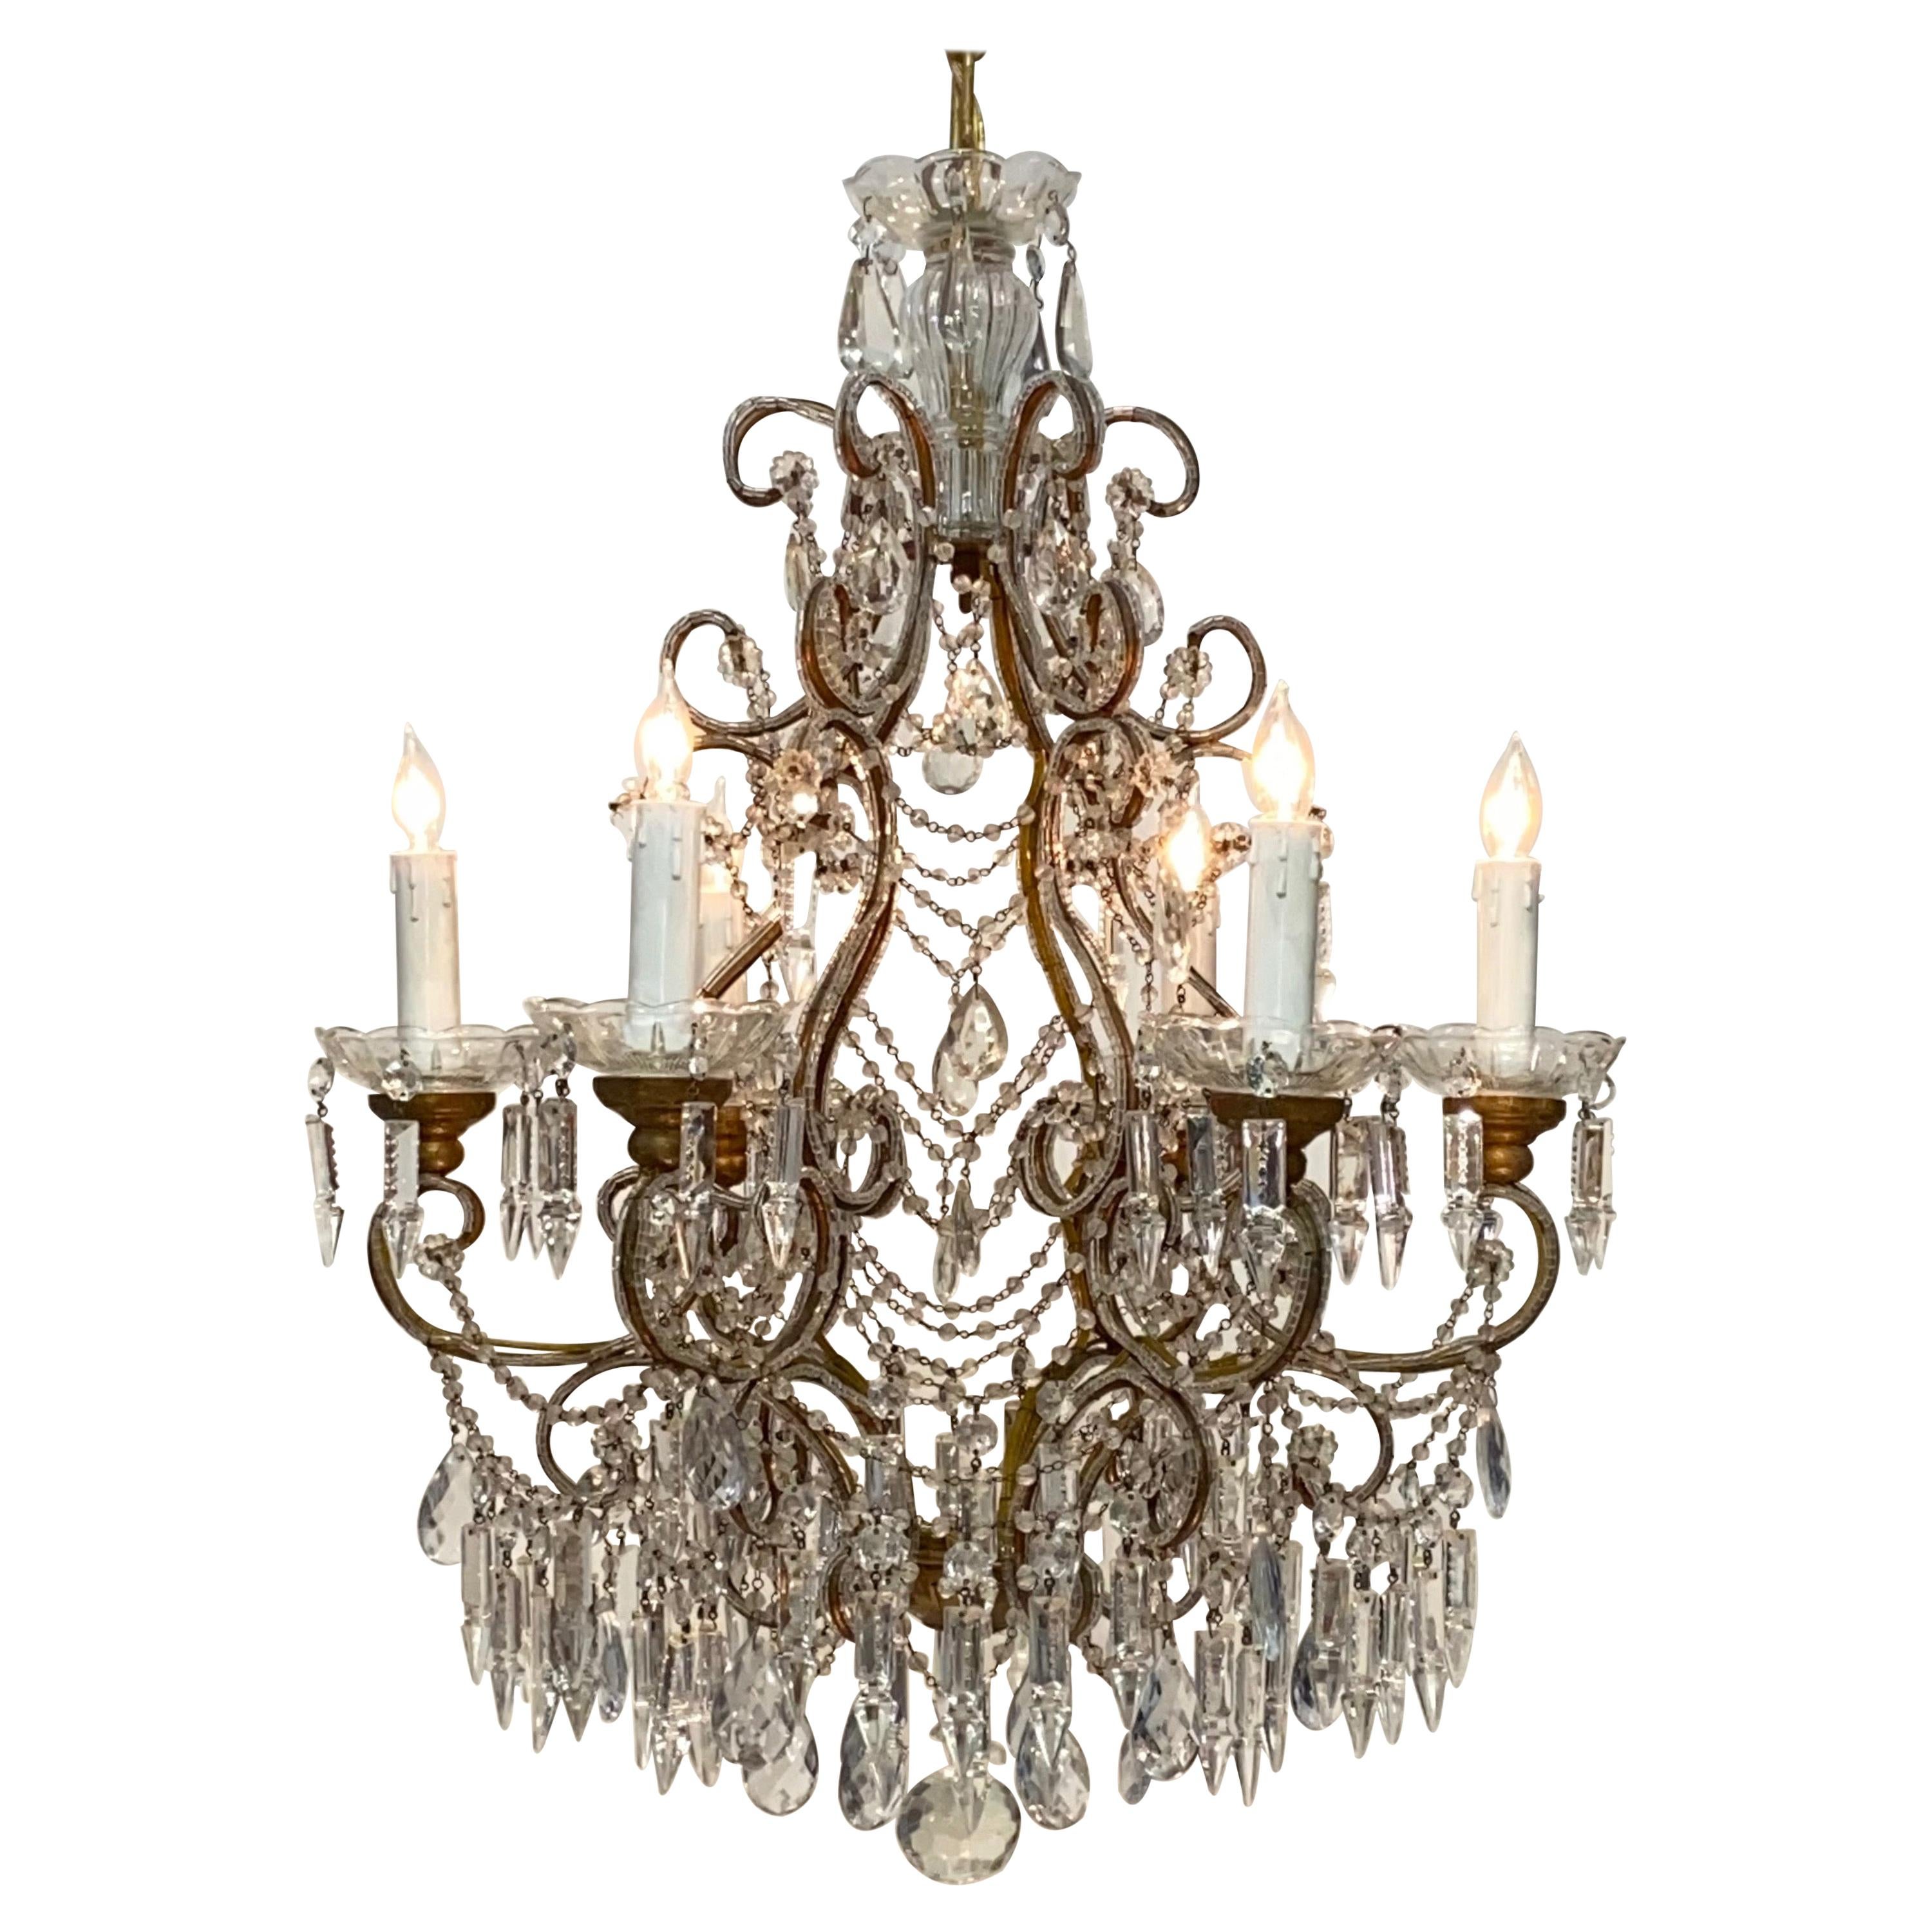 Vintage Italian Doubled Beaded Crystal and Glass Chandelier